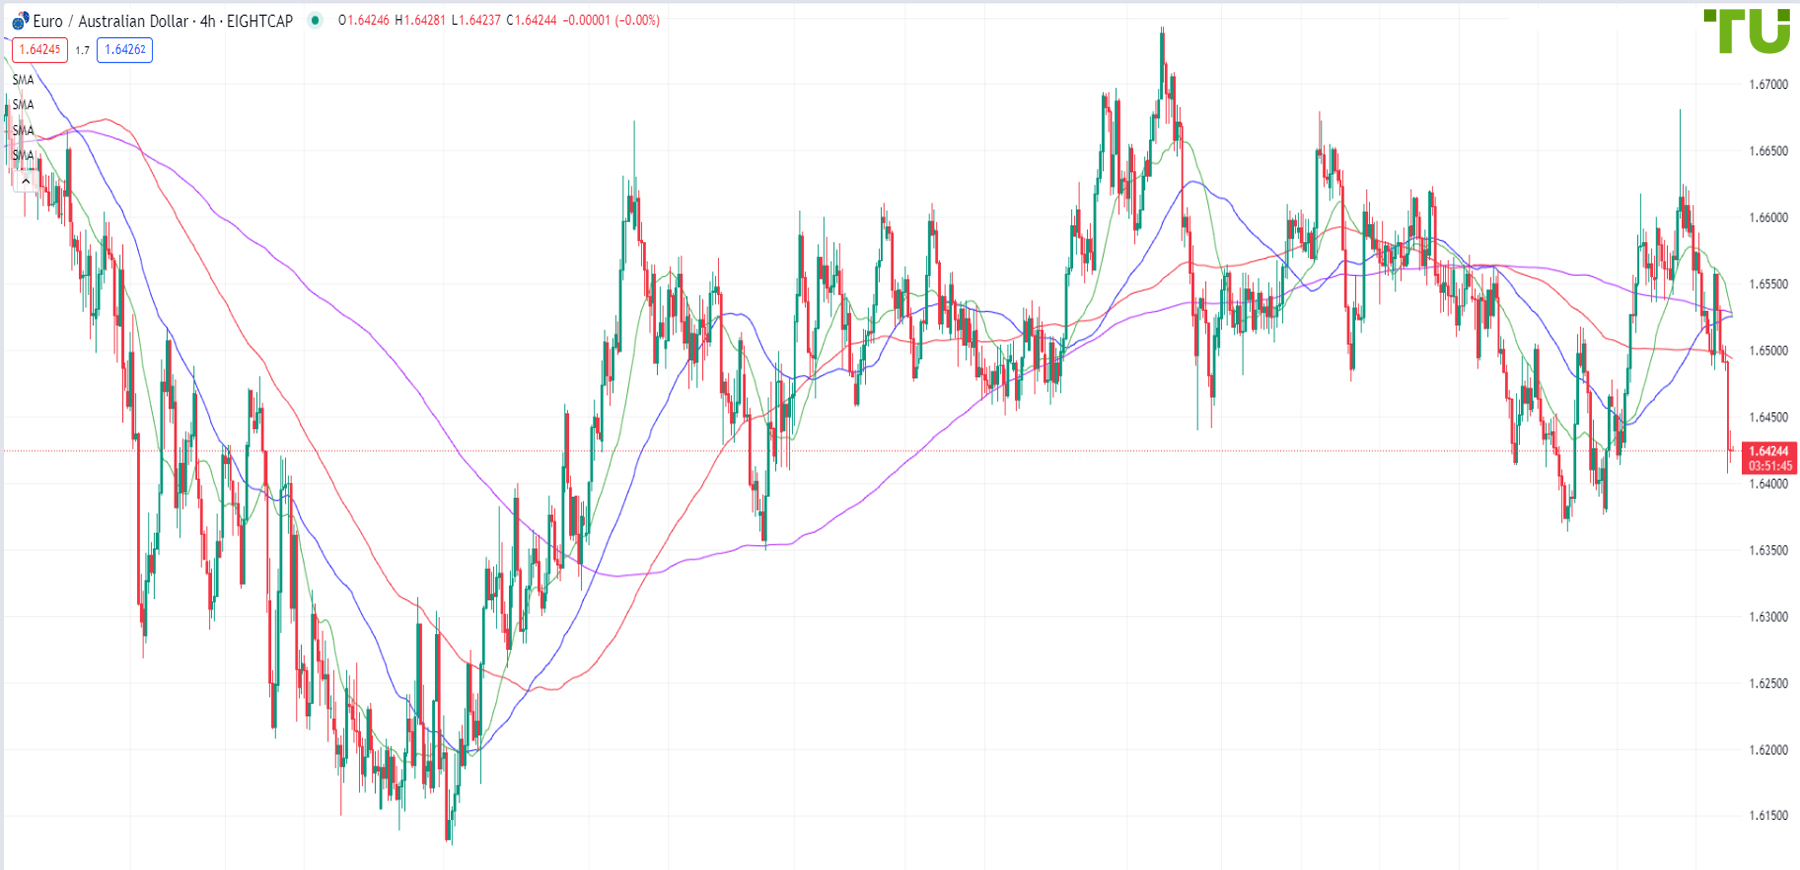 EUR/AUD dipped to 1.6410